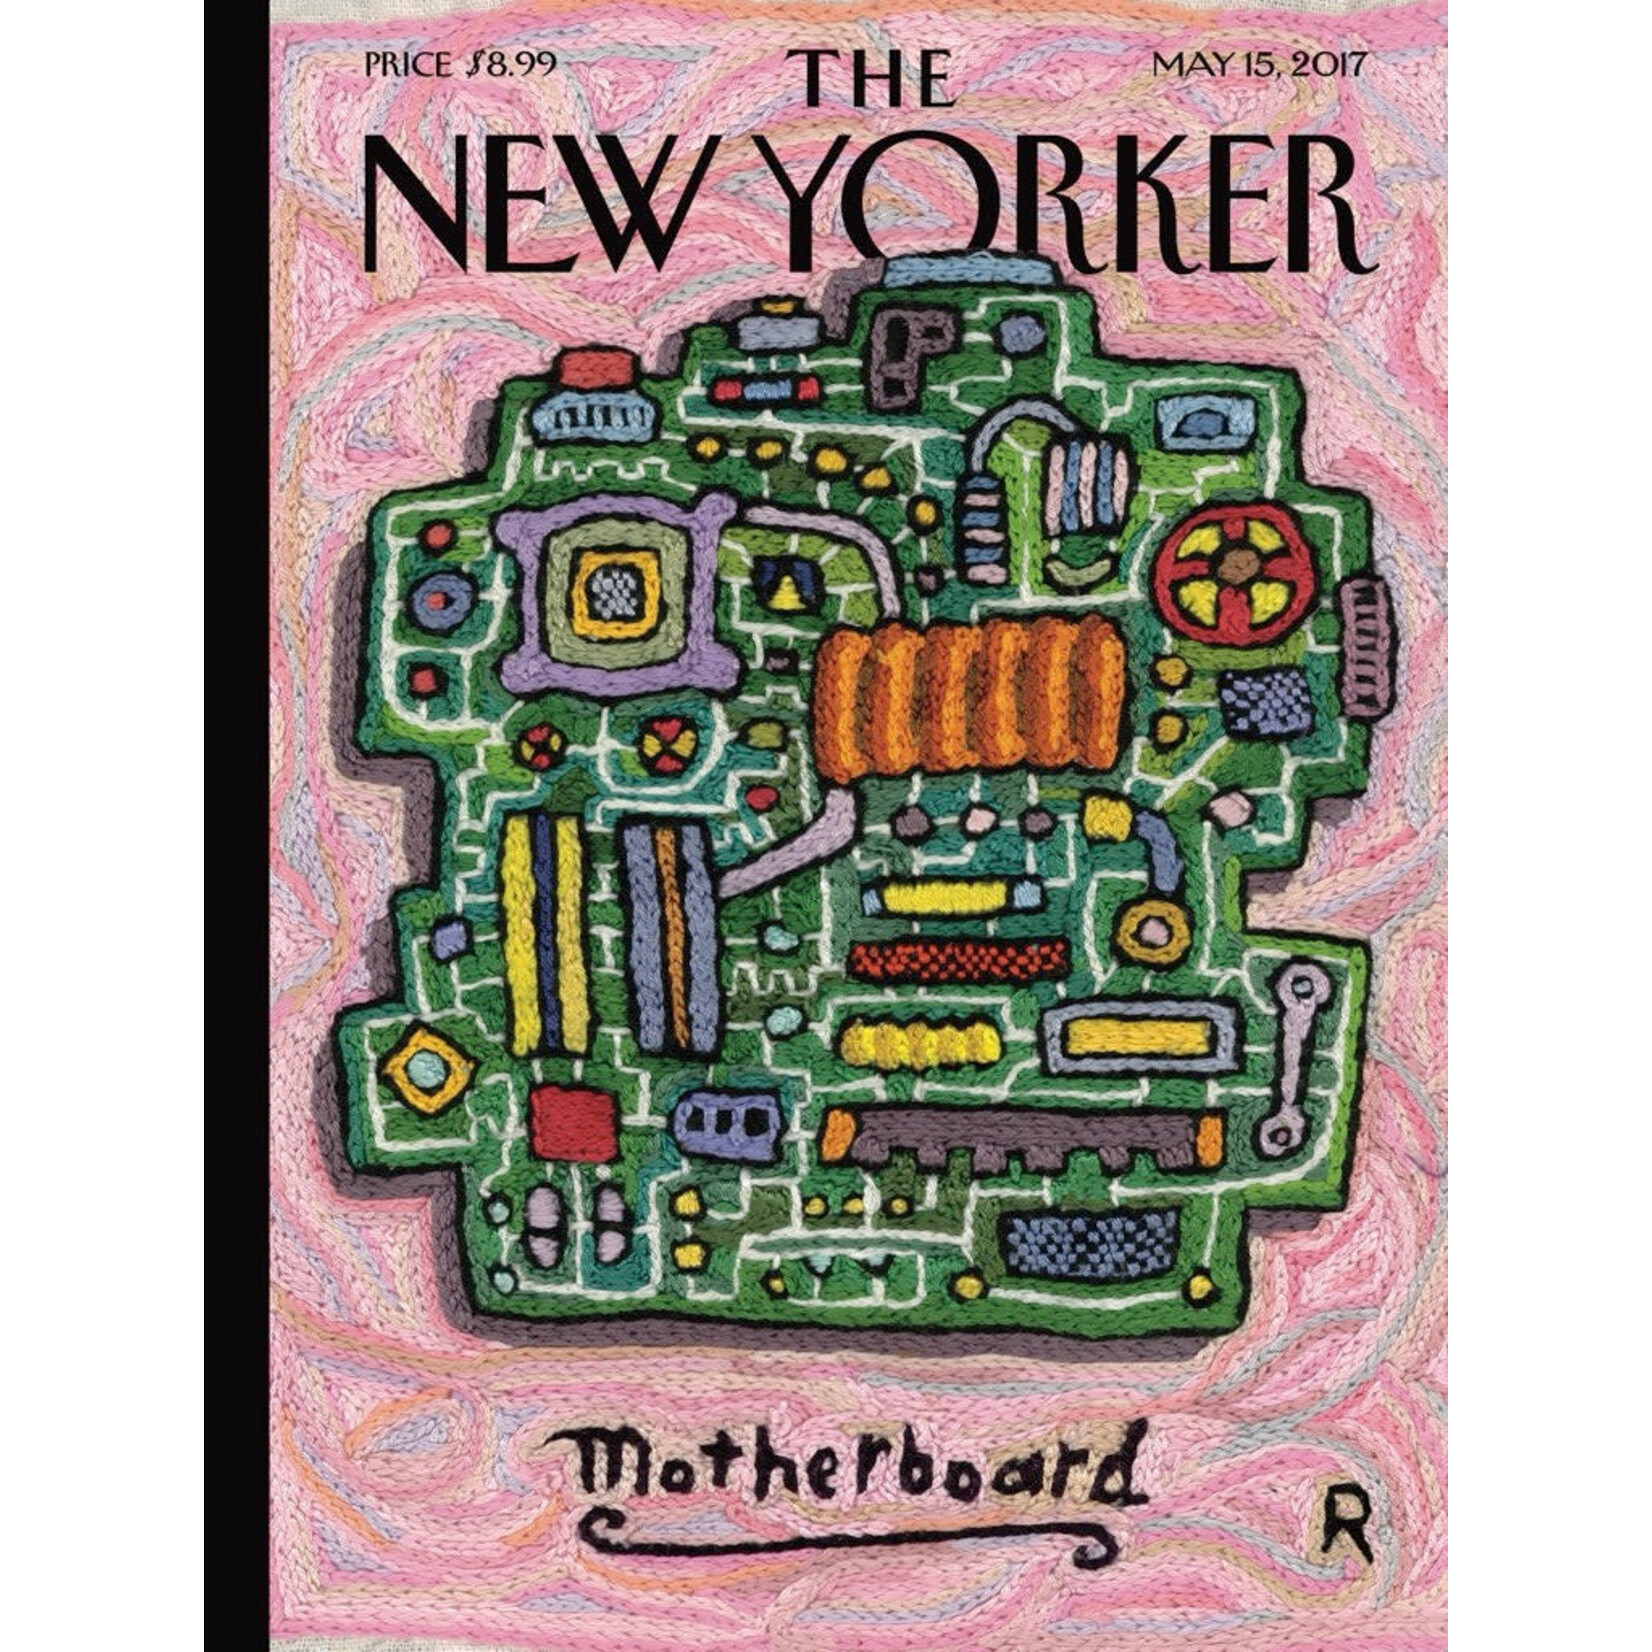 New York Puzzle Co New Yorker, The - Motherboard 1000 Piece Puzzle